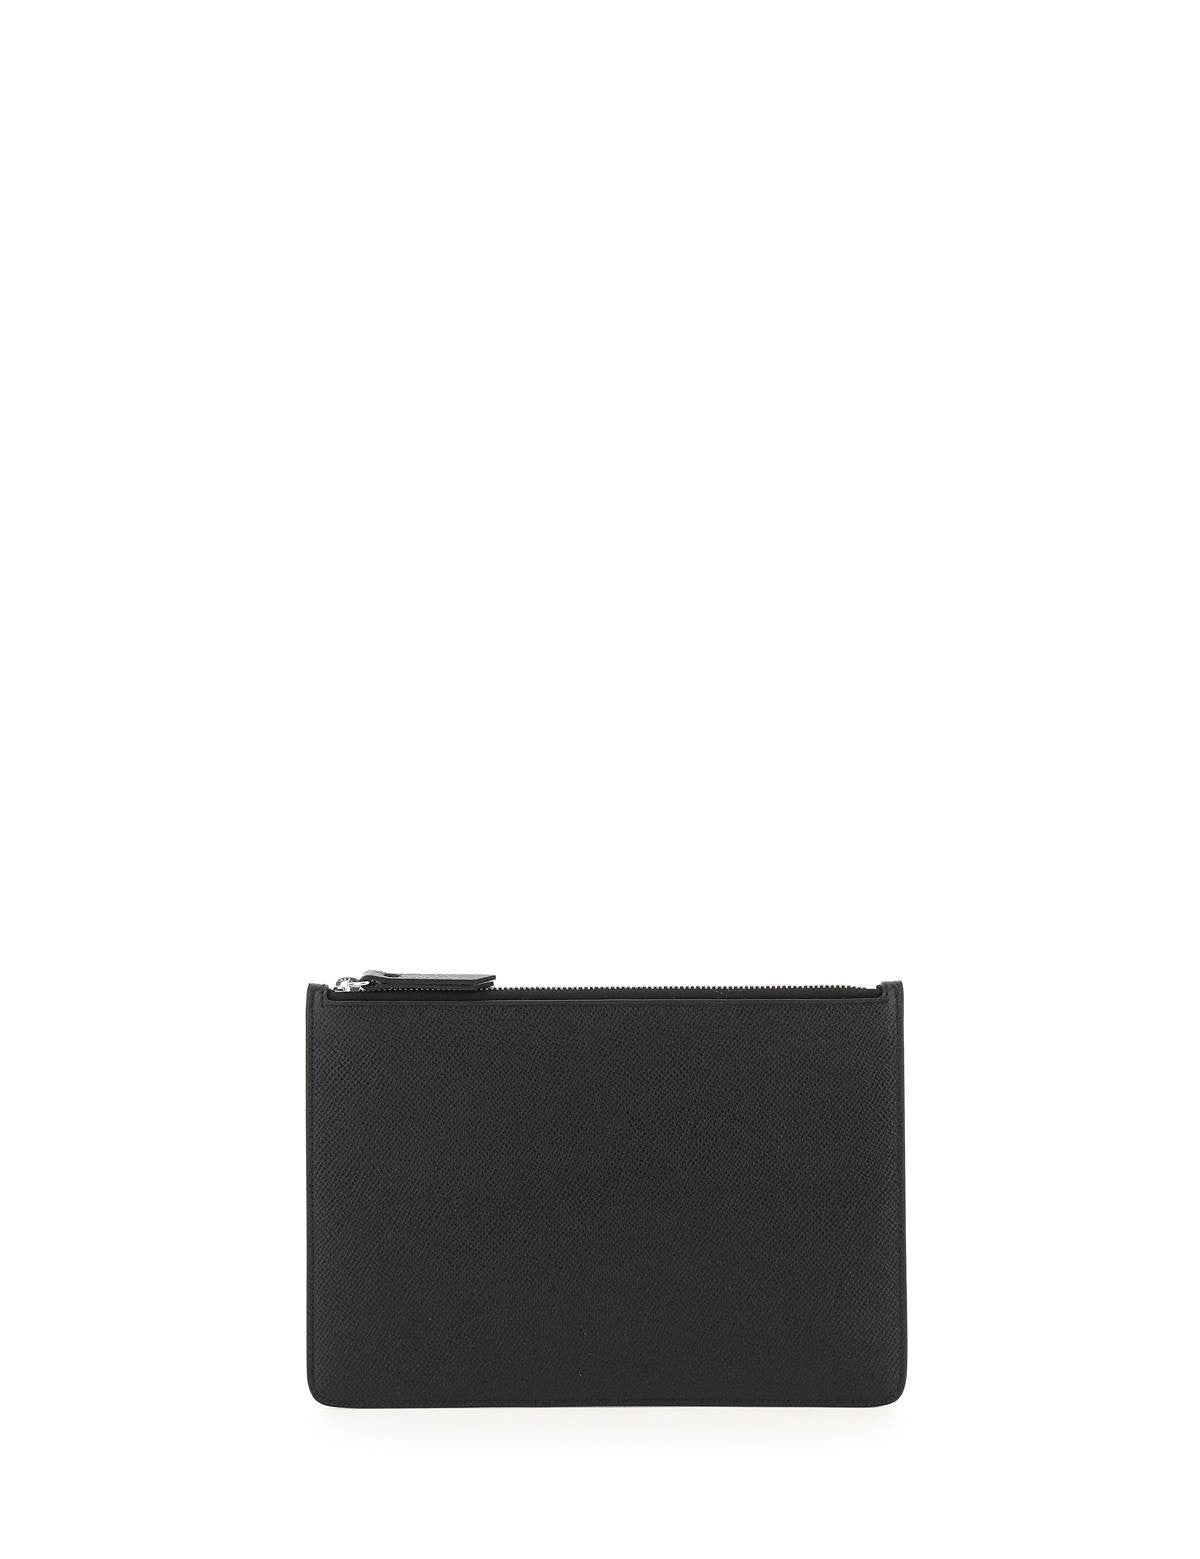 maison-margiela-grained-leather-small-pouch.jpg